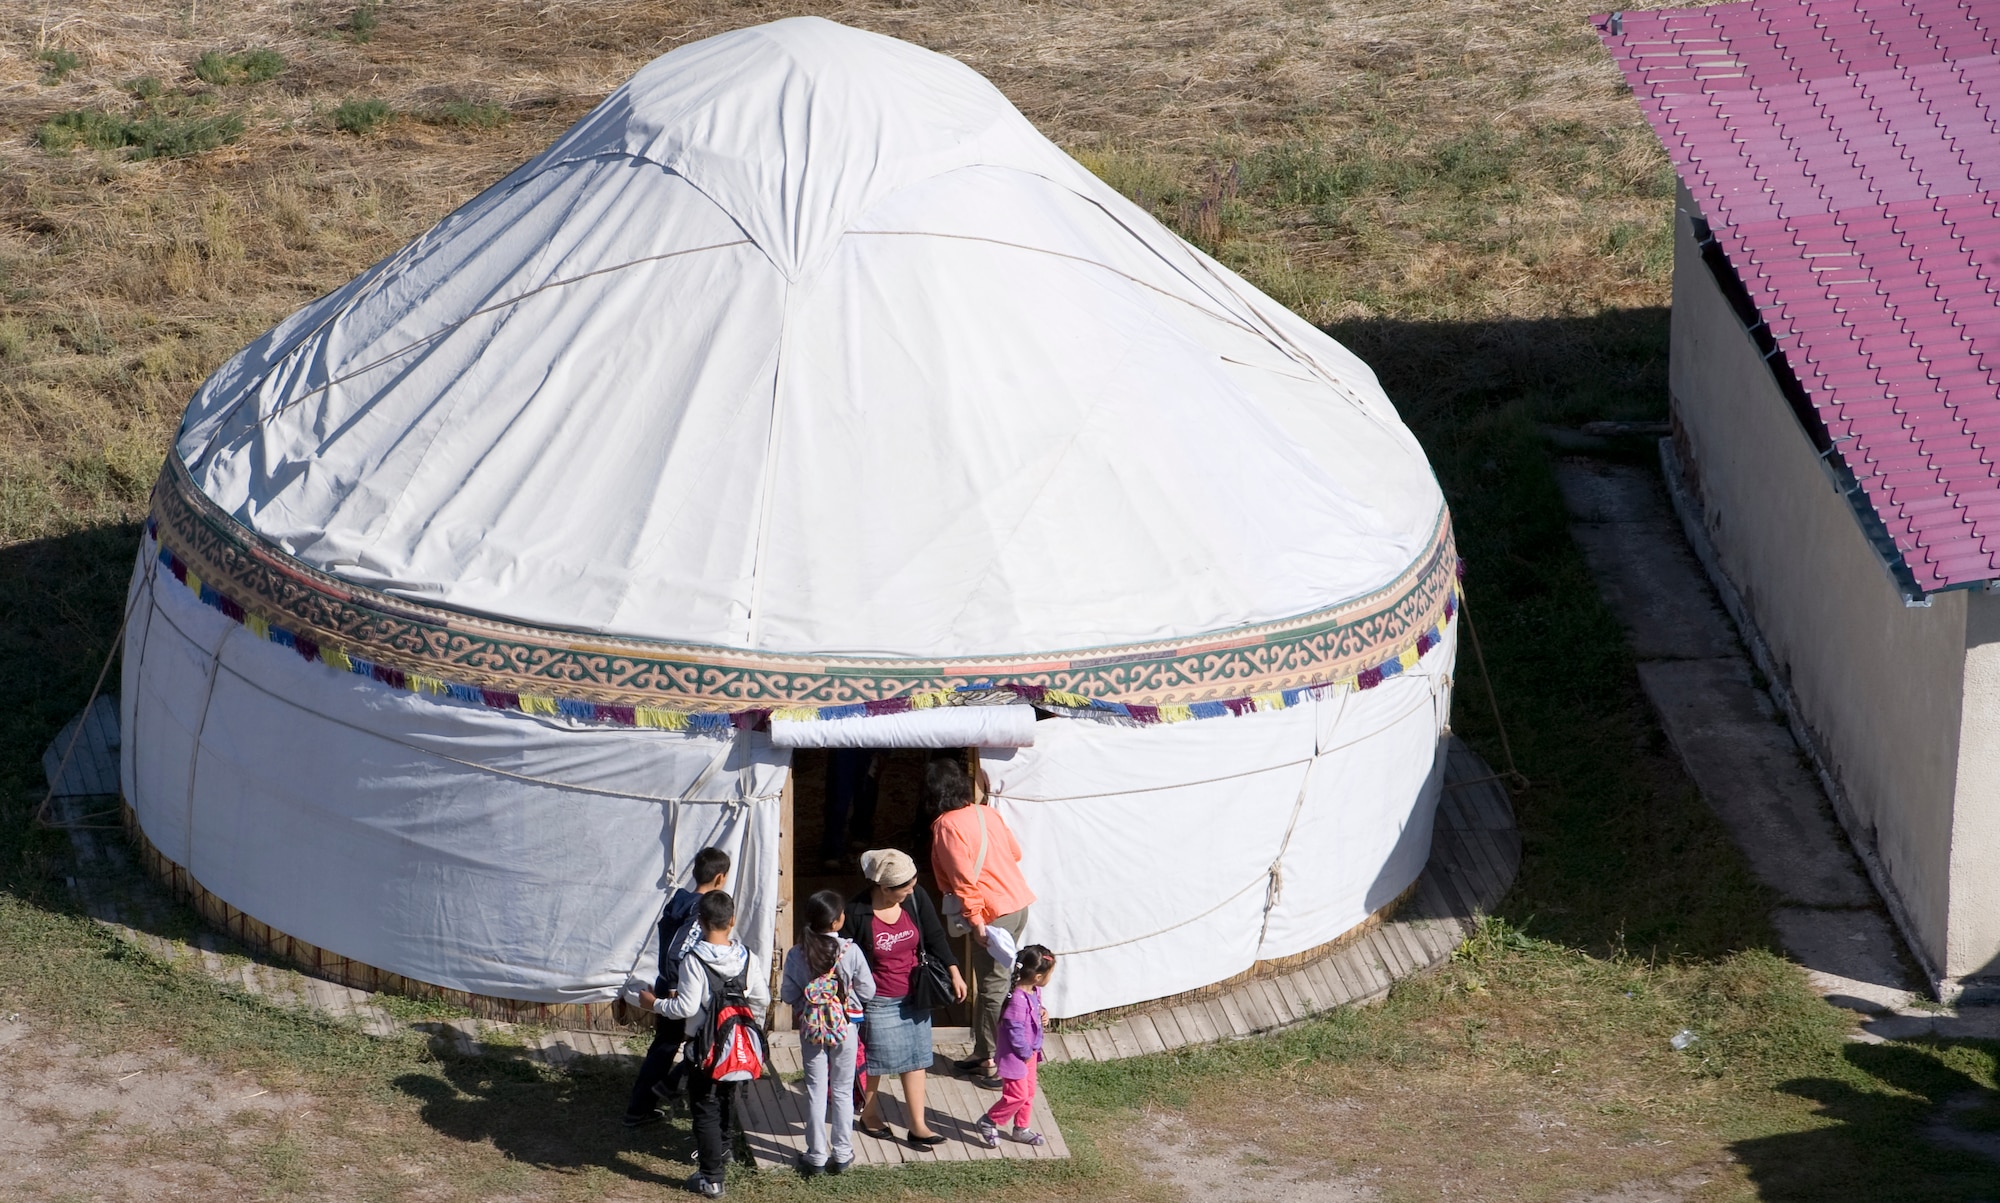 A yurt is used for the sale of handicrafts near an adjacent museum near Tokmok, Kyrgyzstan, Sept. 22, 2013. The yurt is a mobile structure used by the nomadic tribes of Central Asia for thousands of years. (U.S. Air Force photo/Staff Sgt. Krystie Martinez)